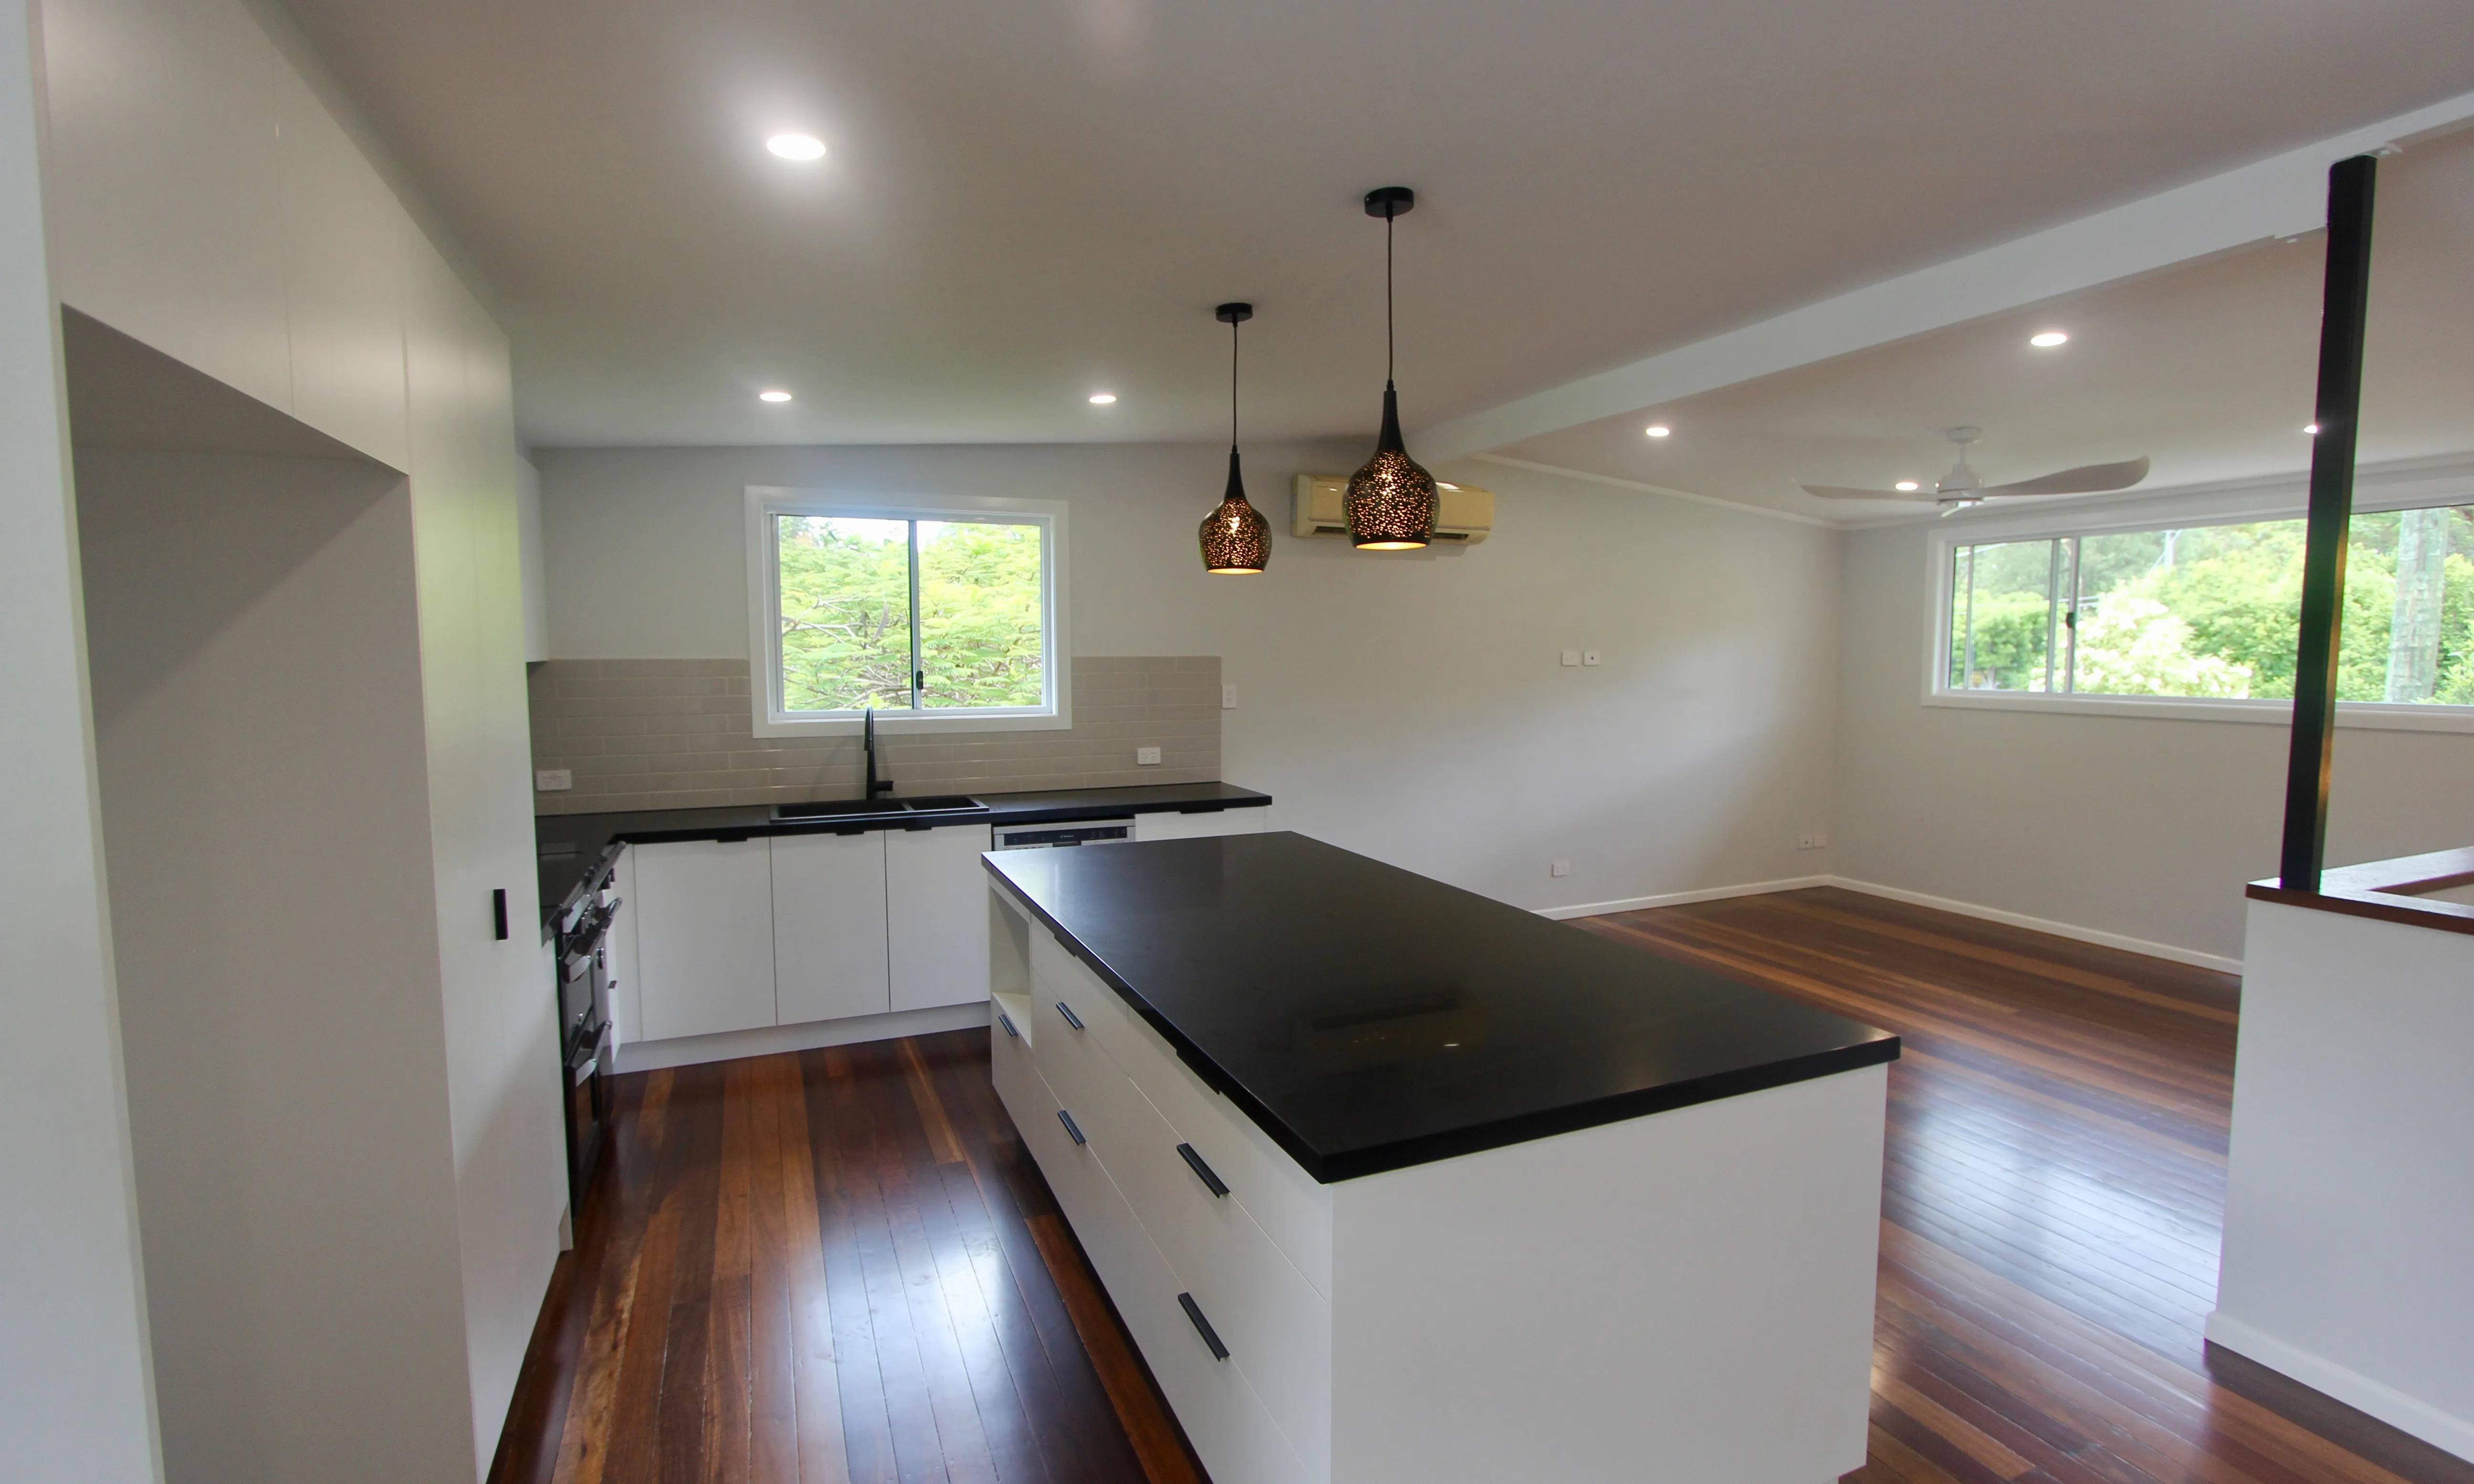 Kitchen island with black stone top and black pendant lights